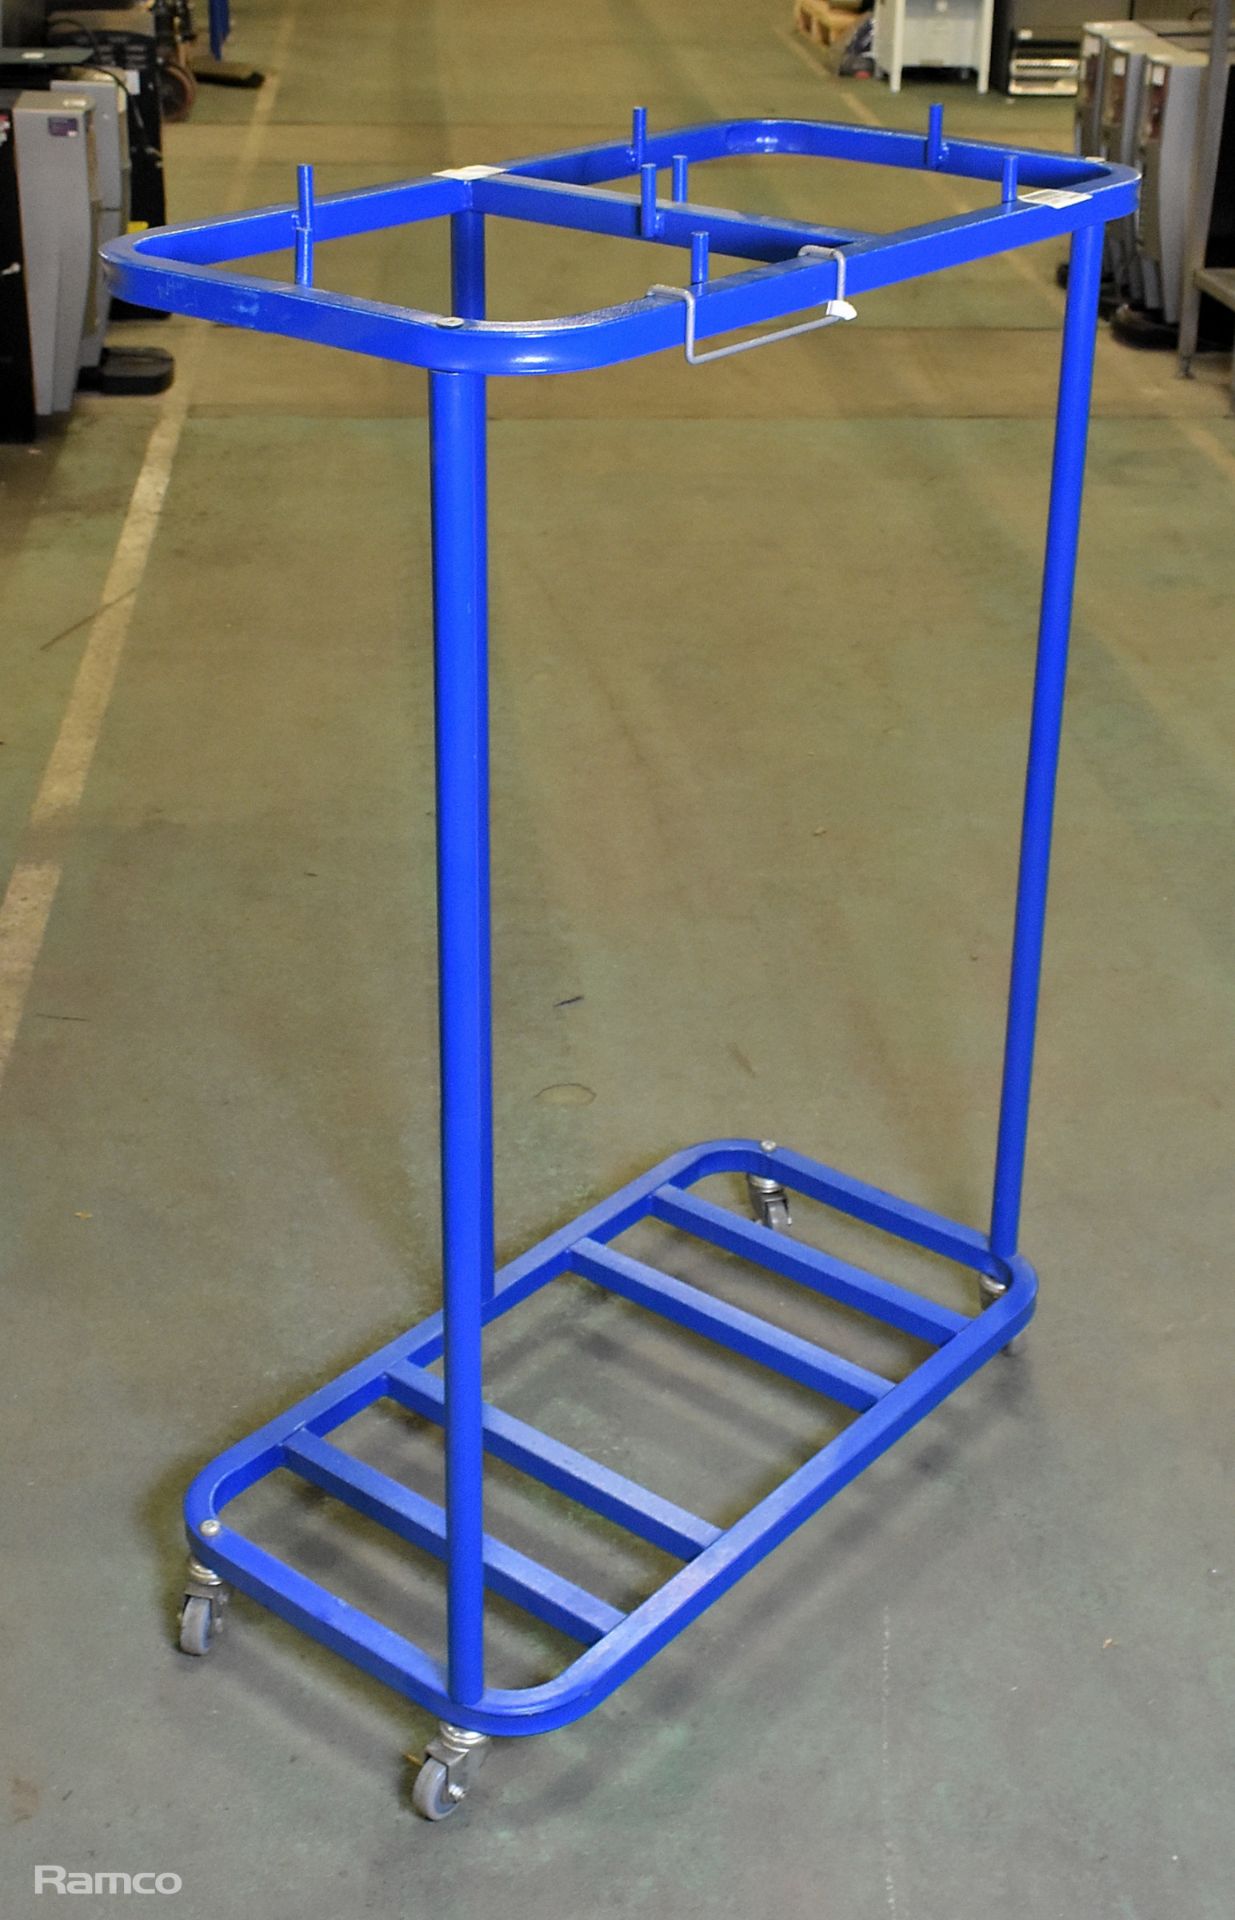 Double portable waste bin frame - Image 2 of 2